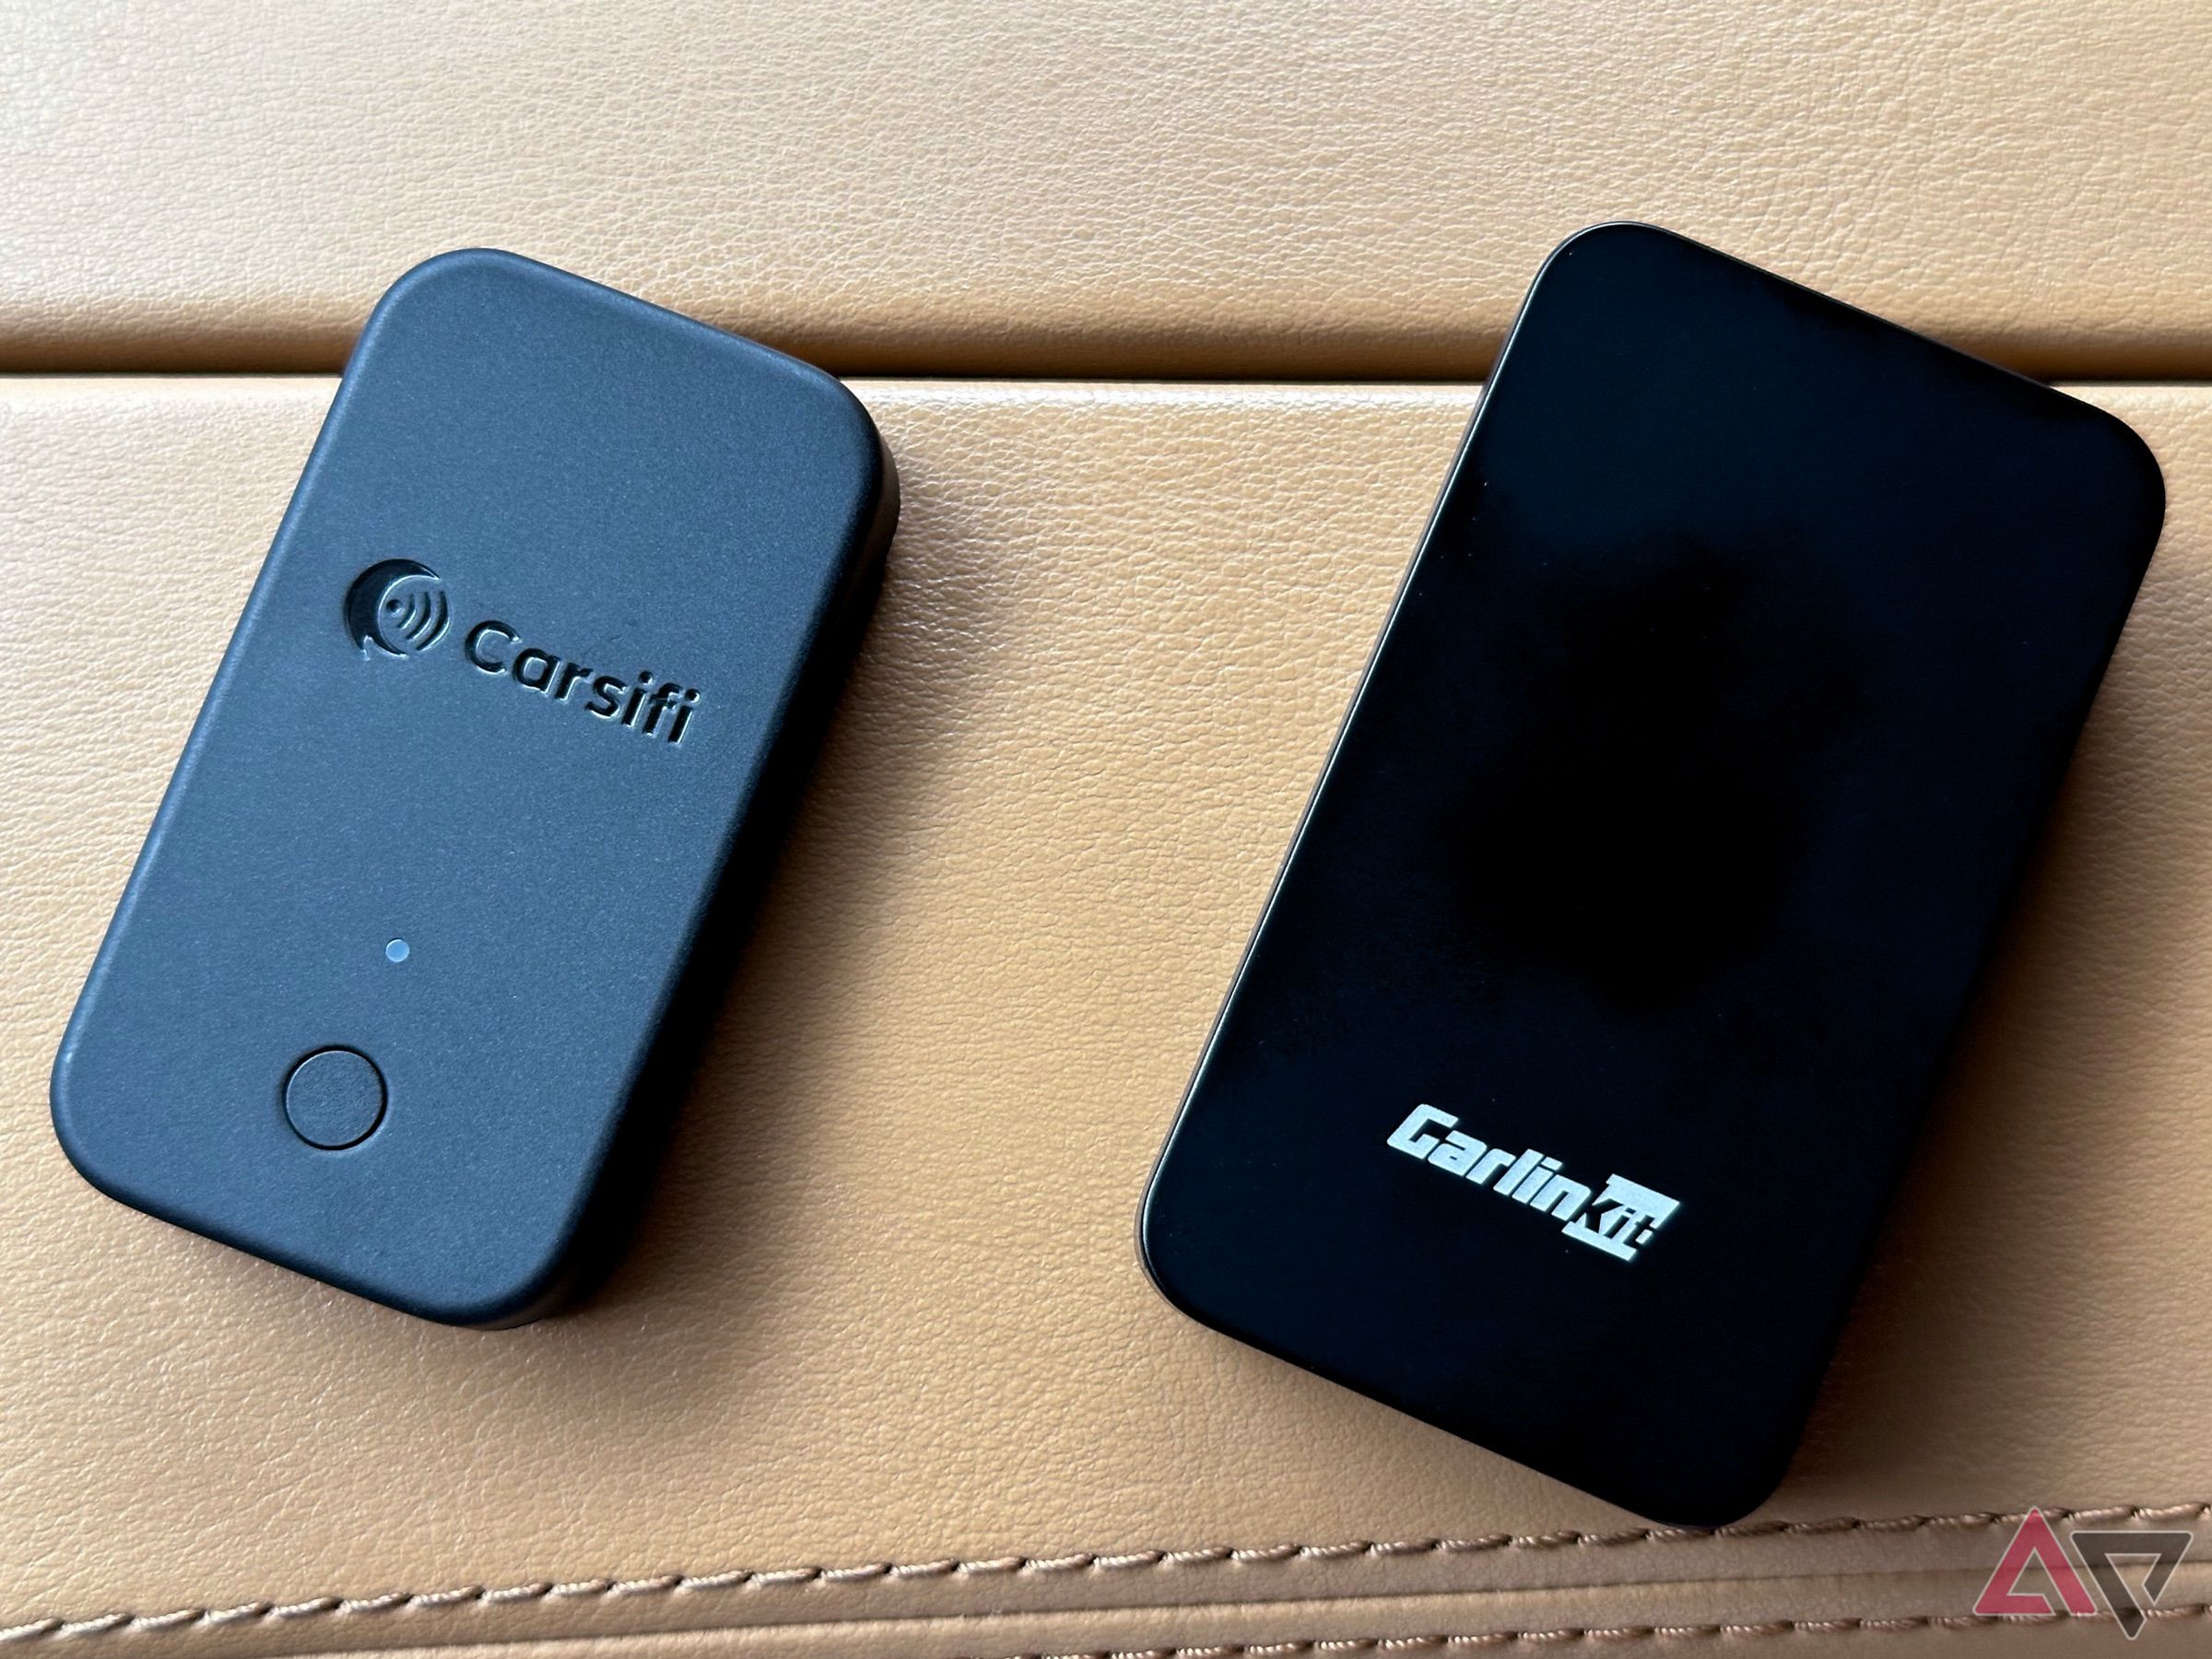 Carsifi Wireless Android Auto Adapter review: A smooth ride for